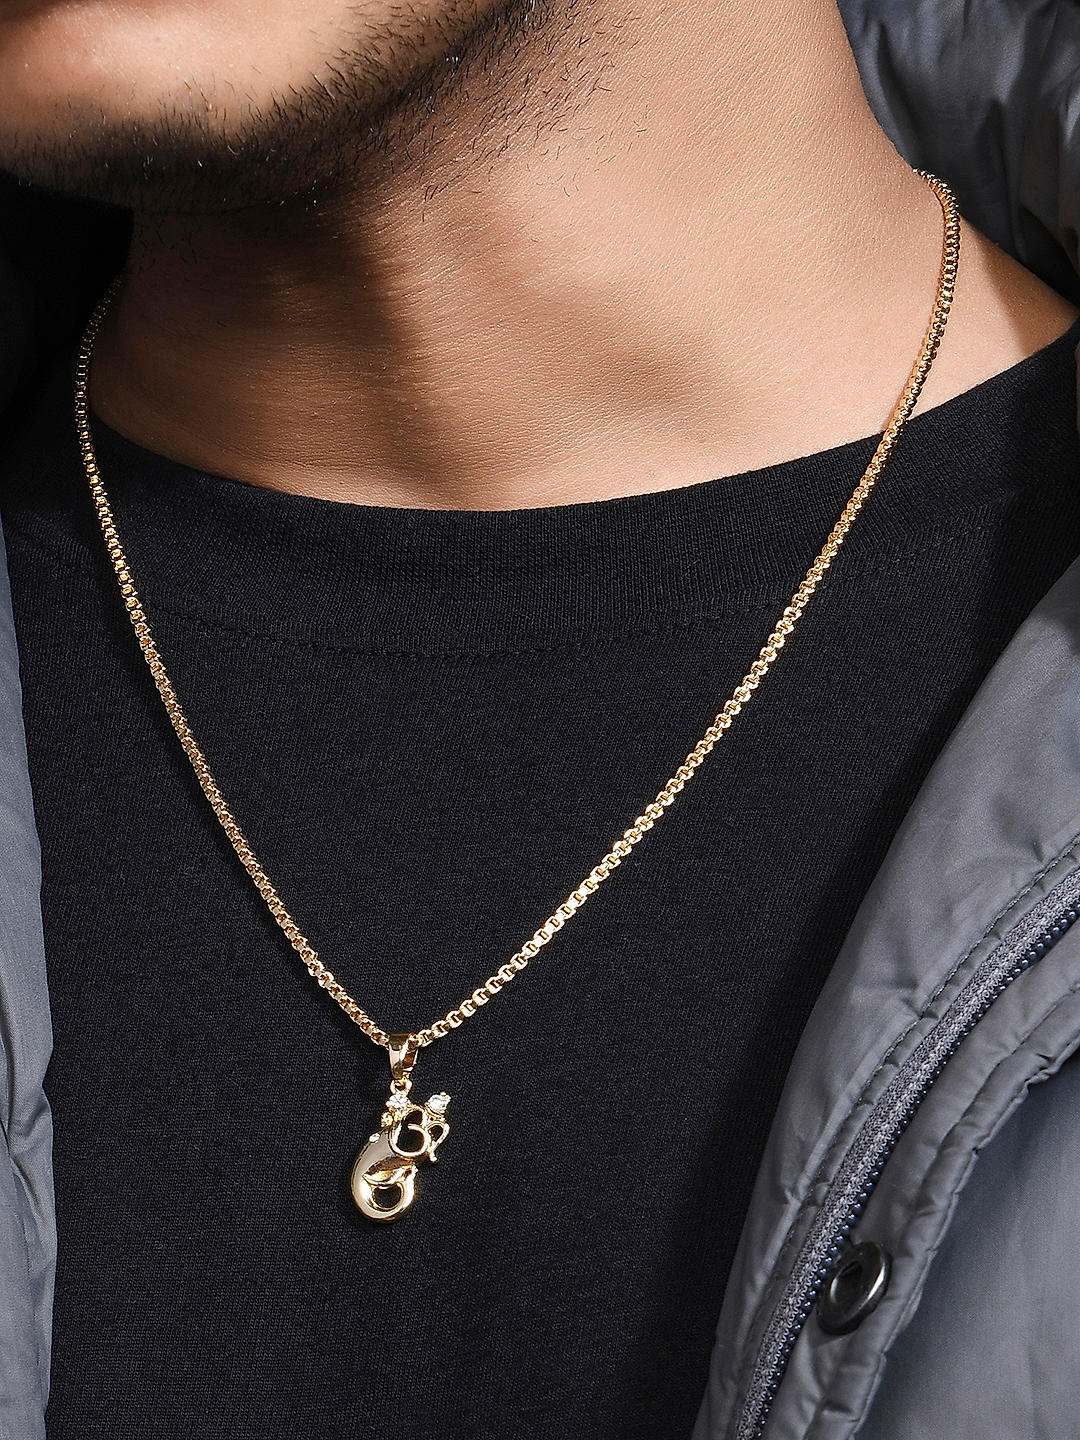 Hillban Diamond Link Gold Chain for Men with Rotatable Dollar Sign Pendant  Necklace Hip Hop Rapper Chain Jewelry Gift for Men Women (8 mm, 36 Inch) |  Amazon.com